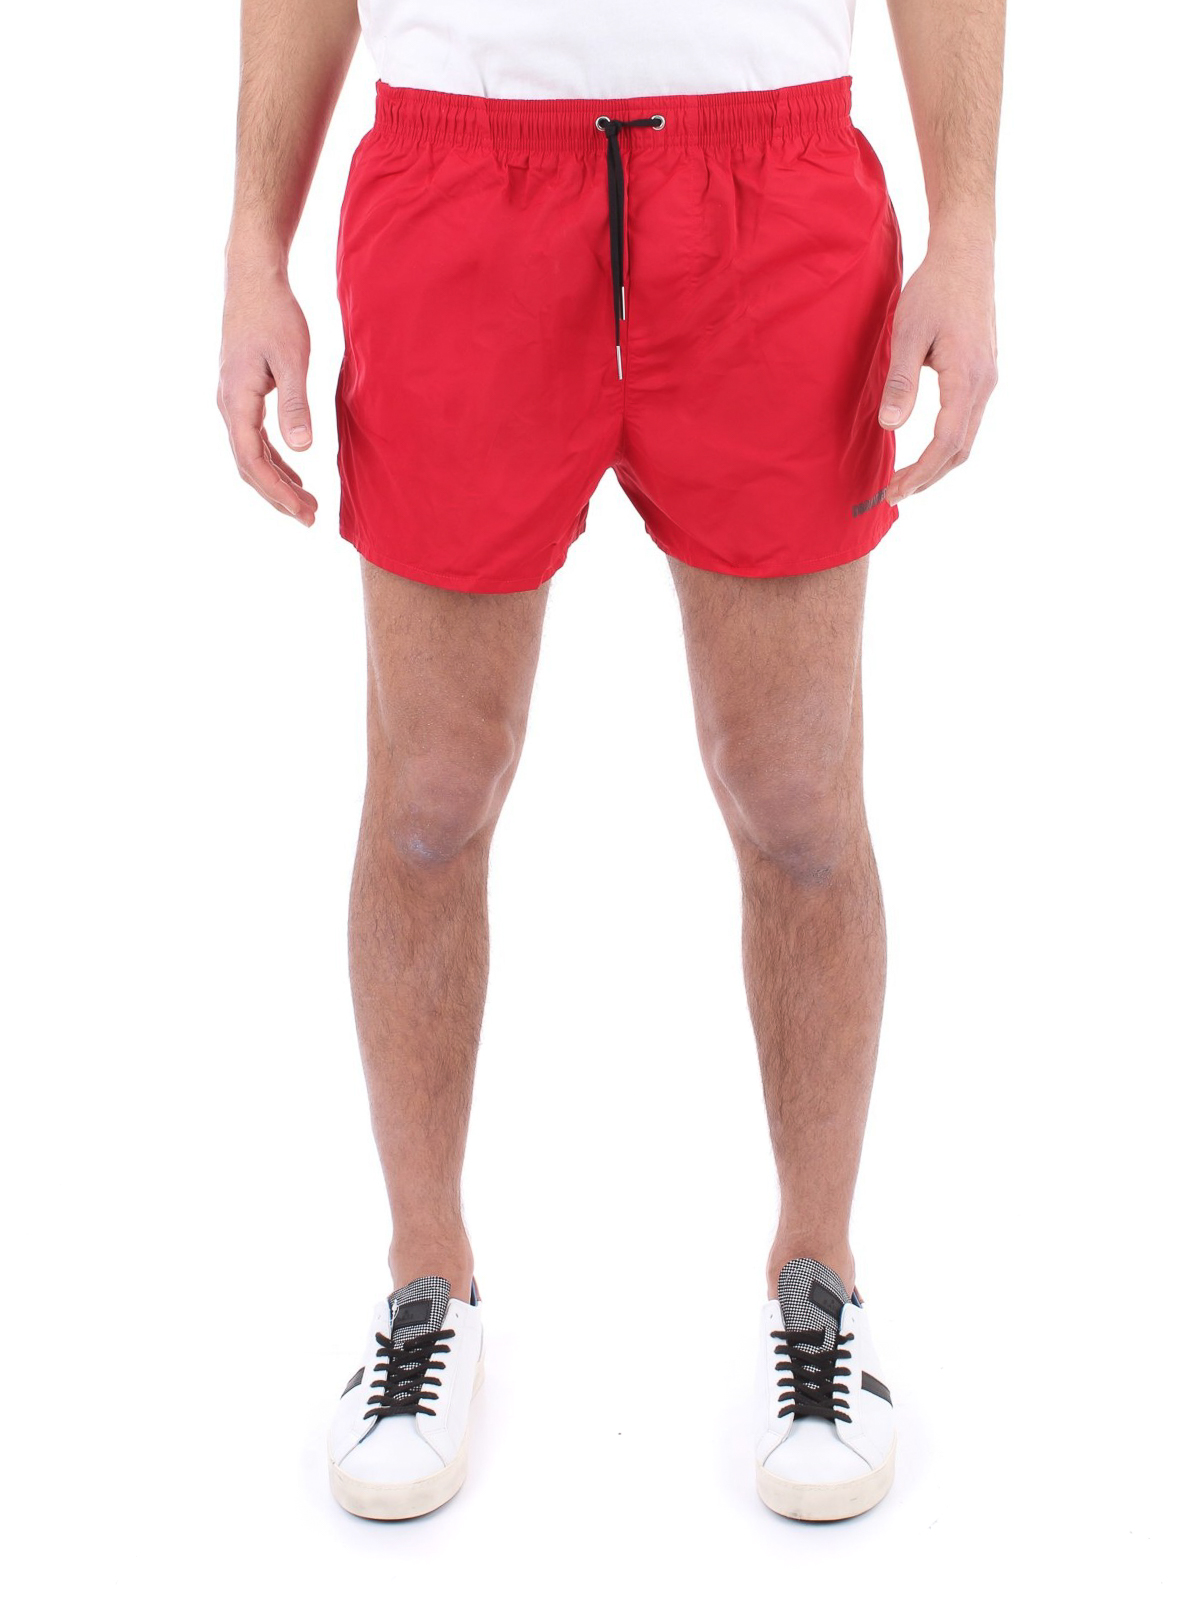 dsquared swimming trunks